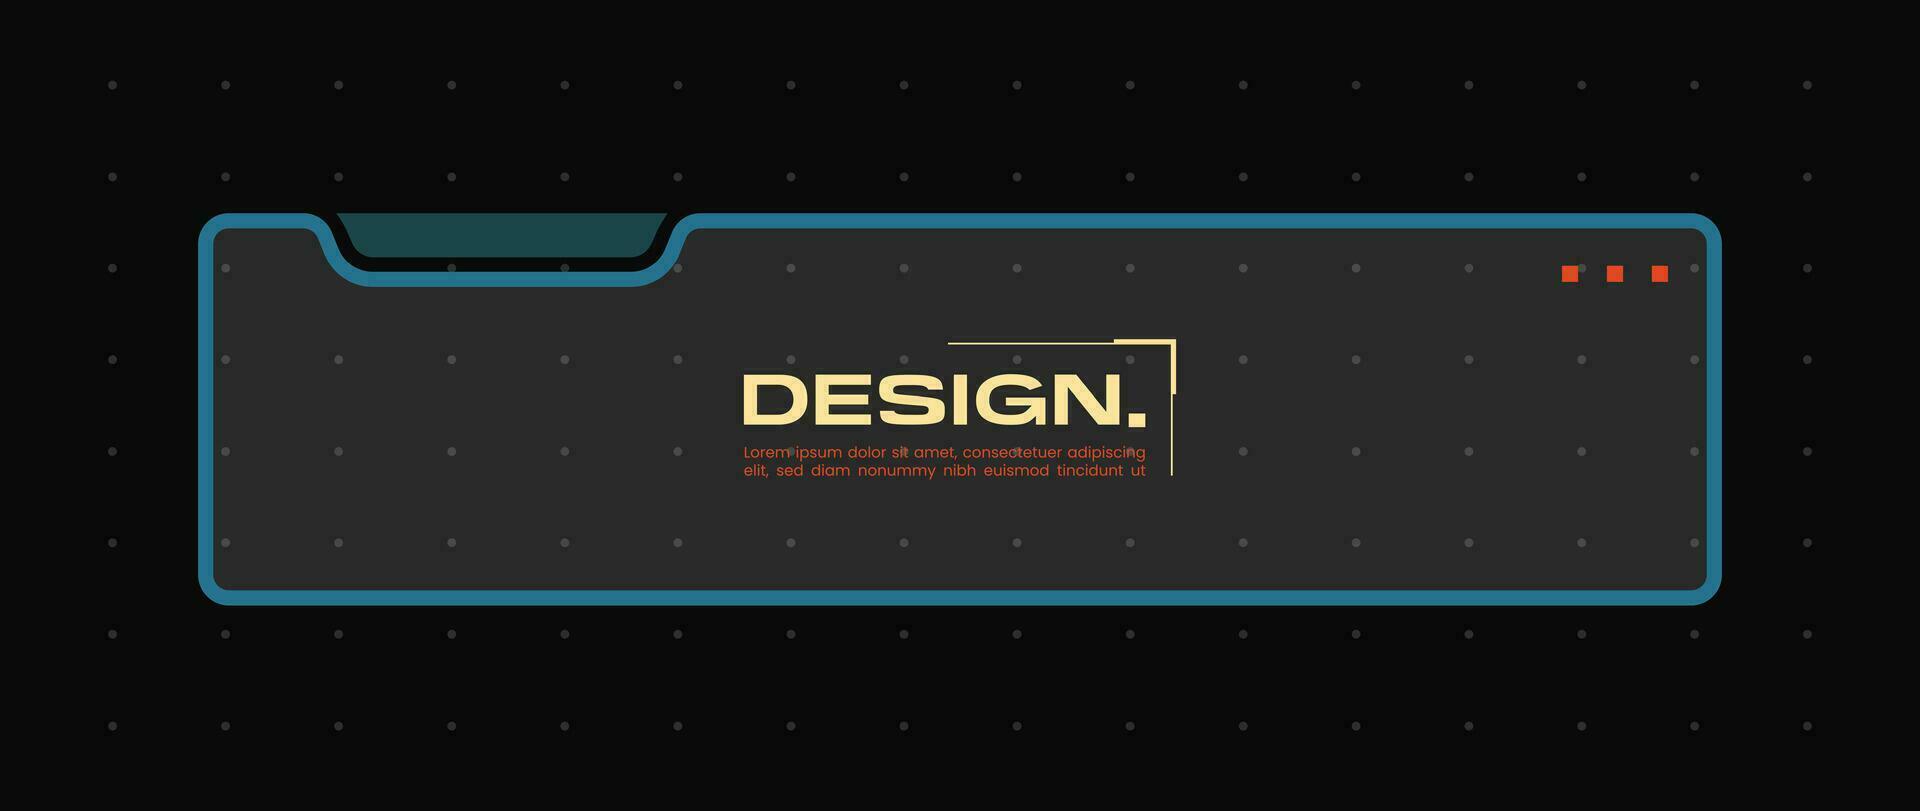 Futuristic element with retro color vector illustration. Vintage lower third video overlay.